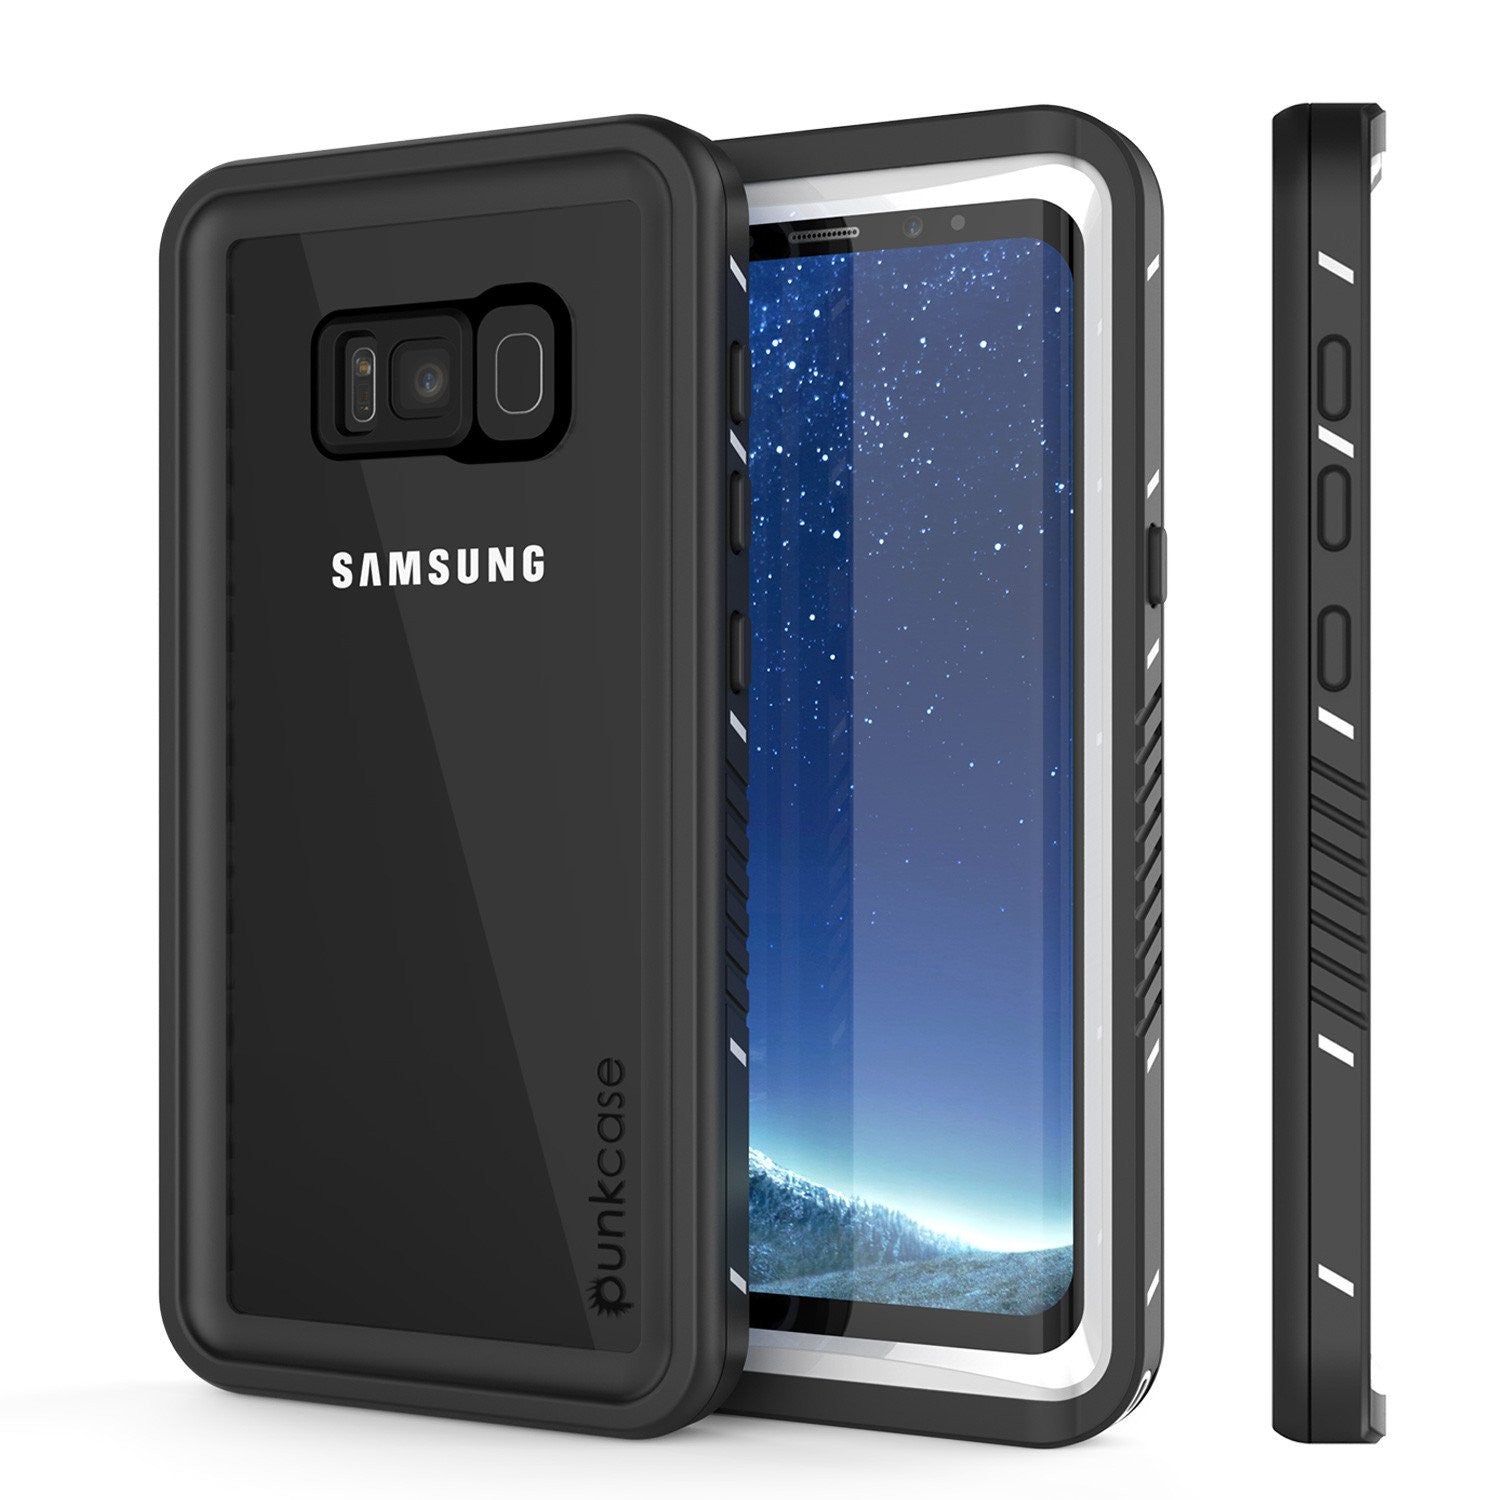 Galaxy S8 PLUS Waterproof Case, Punkcase [Extreme Series] [Slim Fit] [IP68 Certified] [Shockproof] [Snowproof] [Dirproof] Armor Cover [White] (Color in image: White)